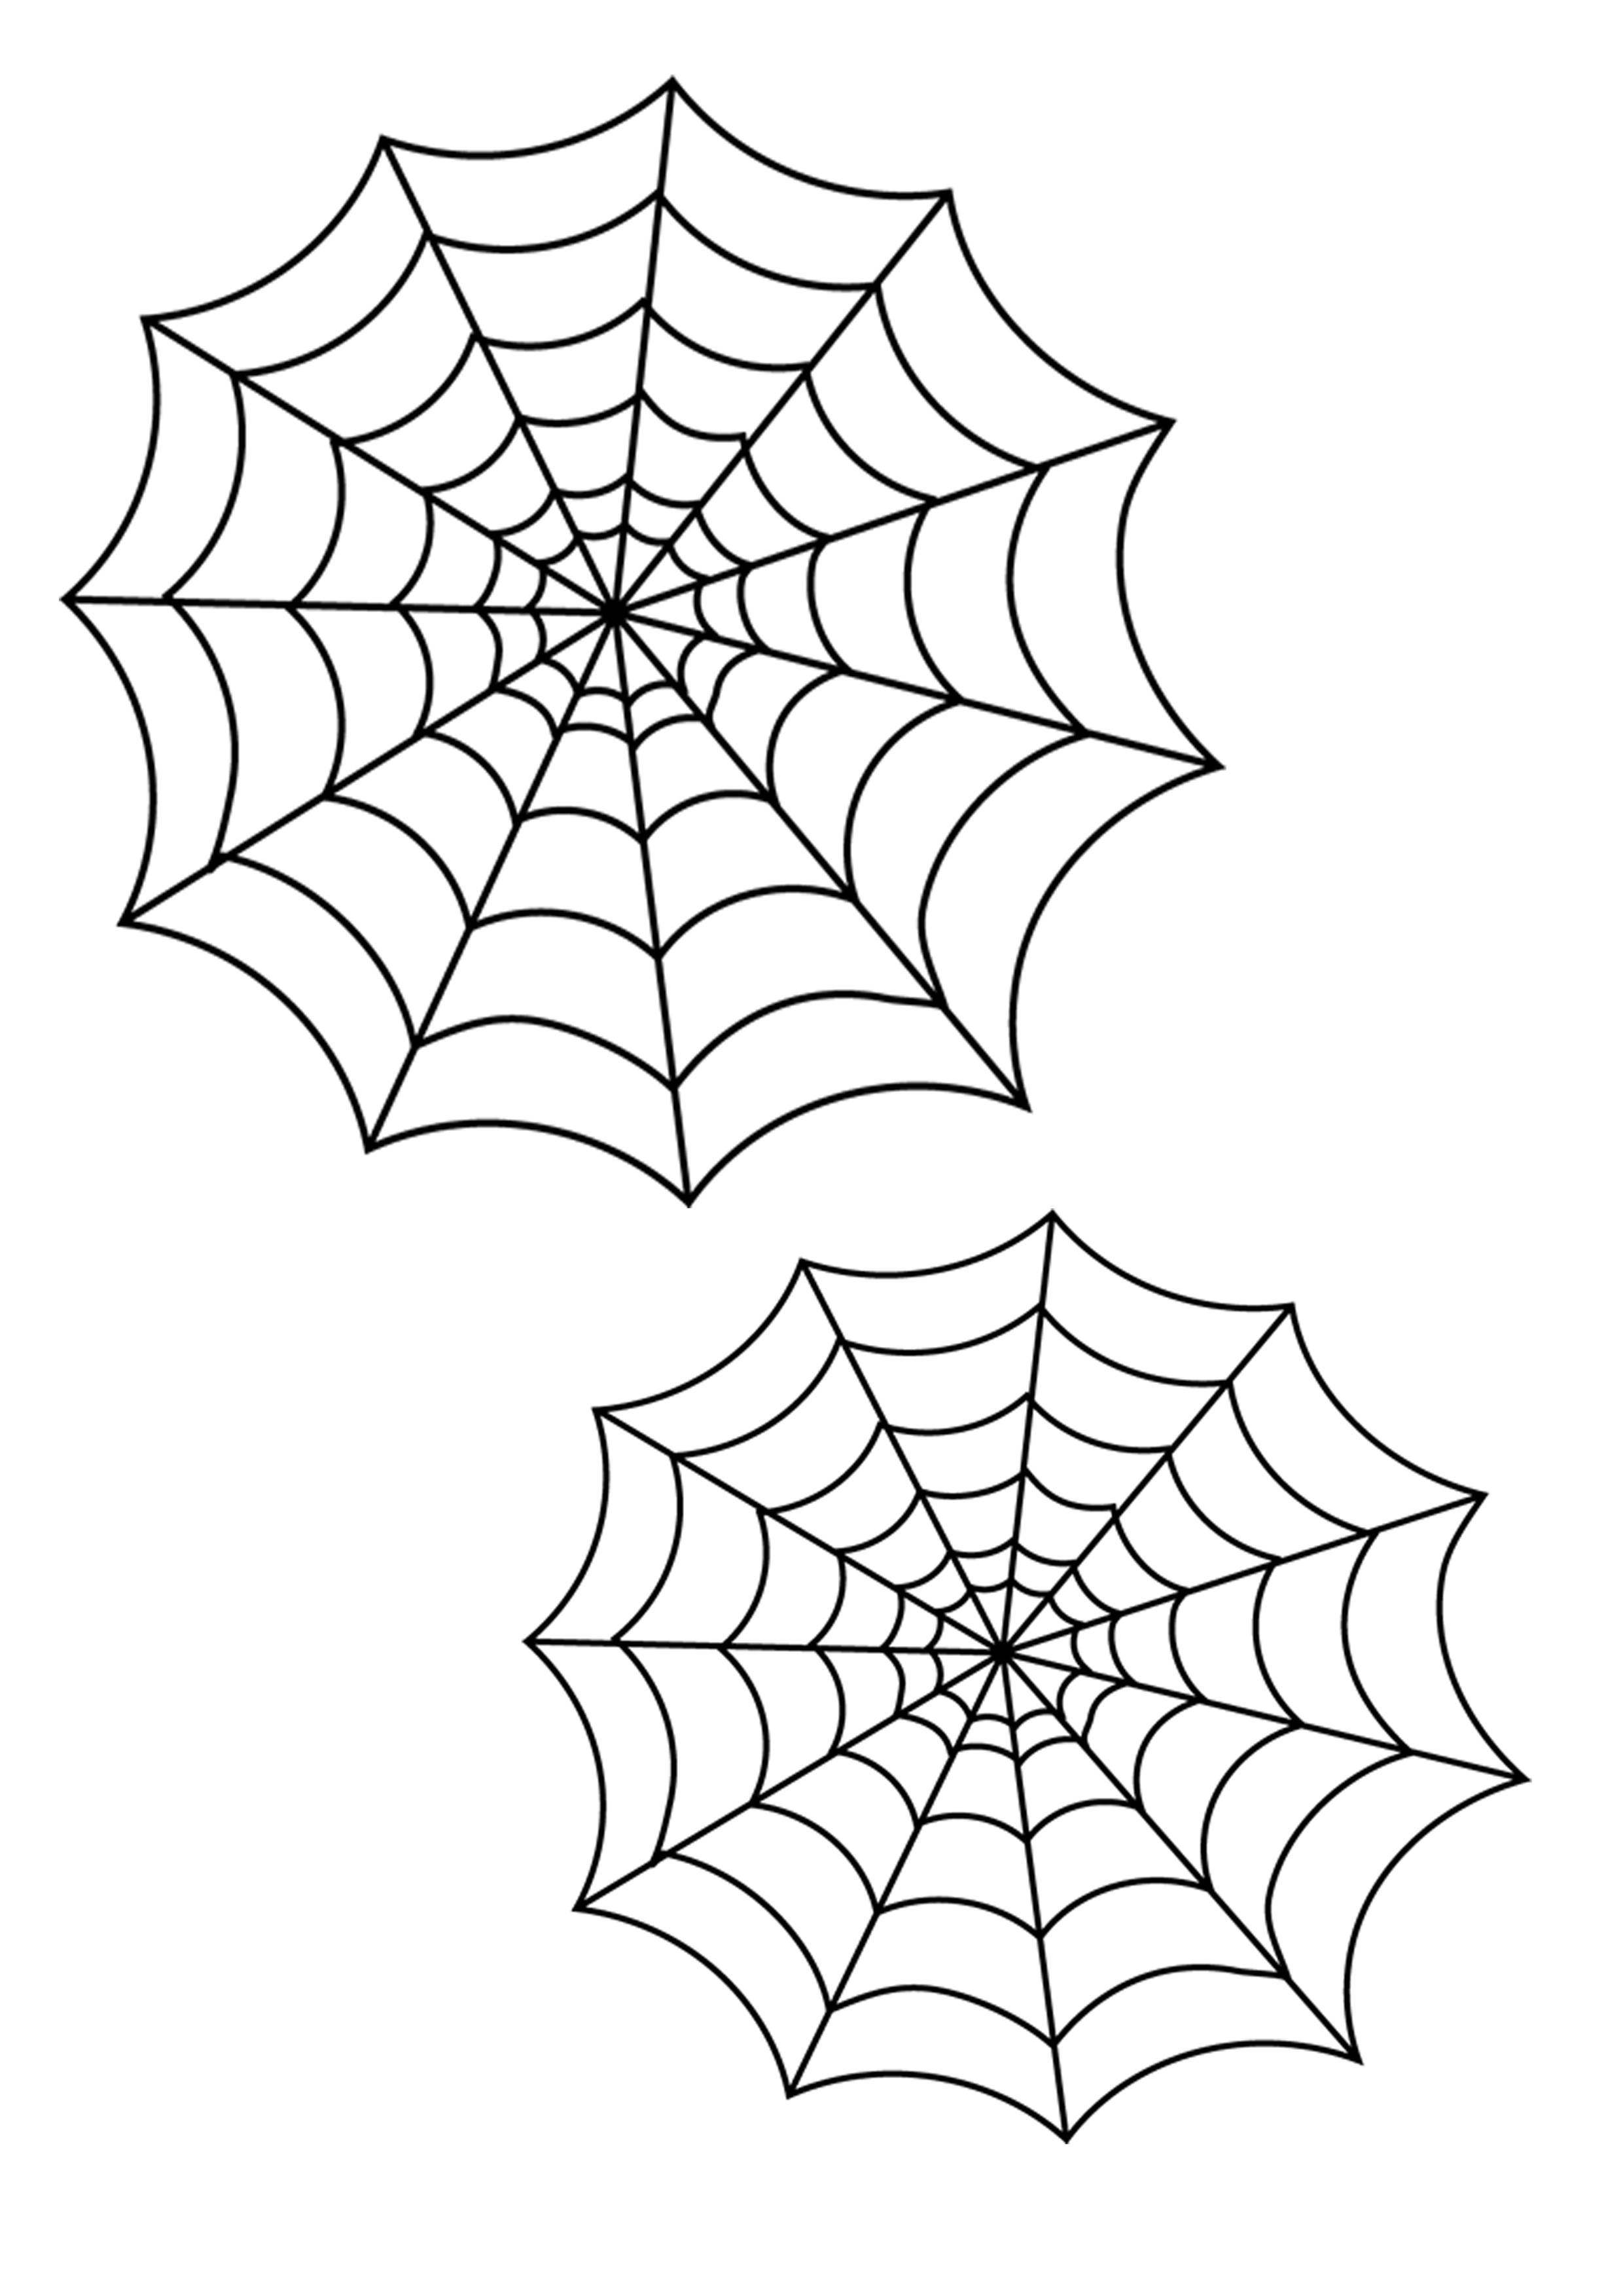 How To Make Glitter Glue Spider Web Halloween Decorations #CraftyOctober